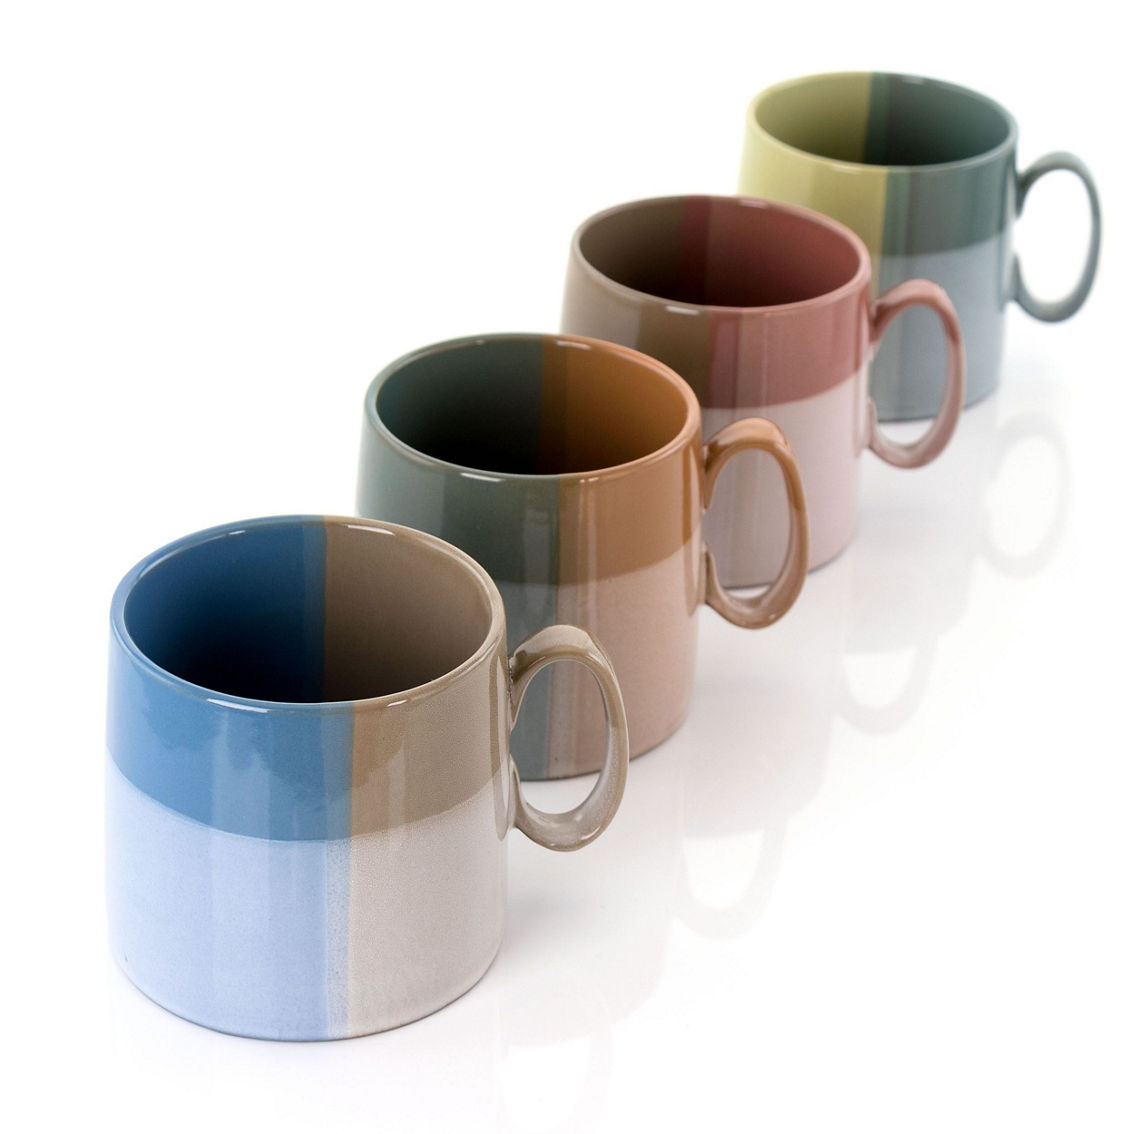 Gibson Home Glasgow 4 Piece 19.5 Ounce Fine Ceramic Cup Set in Assorted Designs - Image 3 of 5